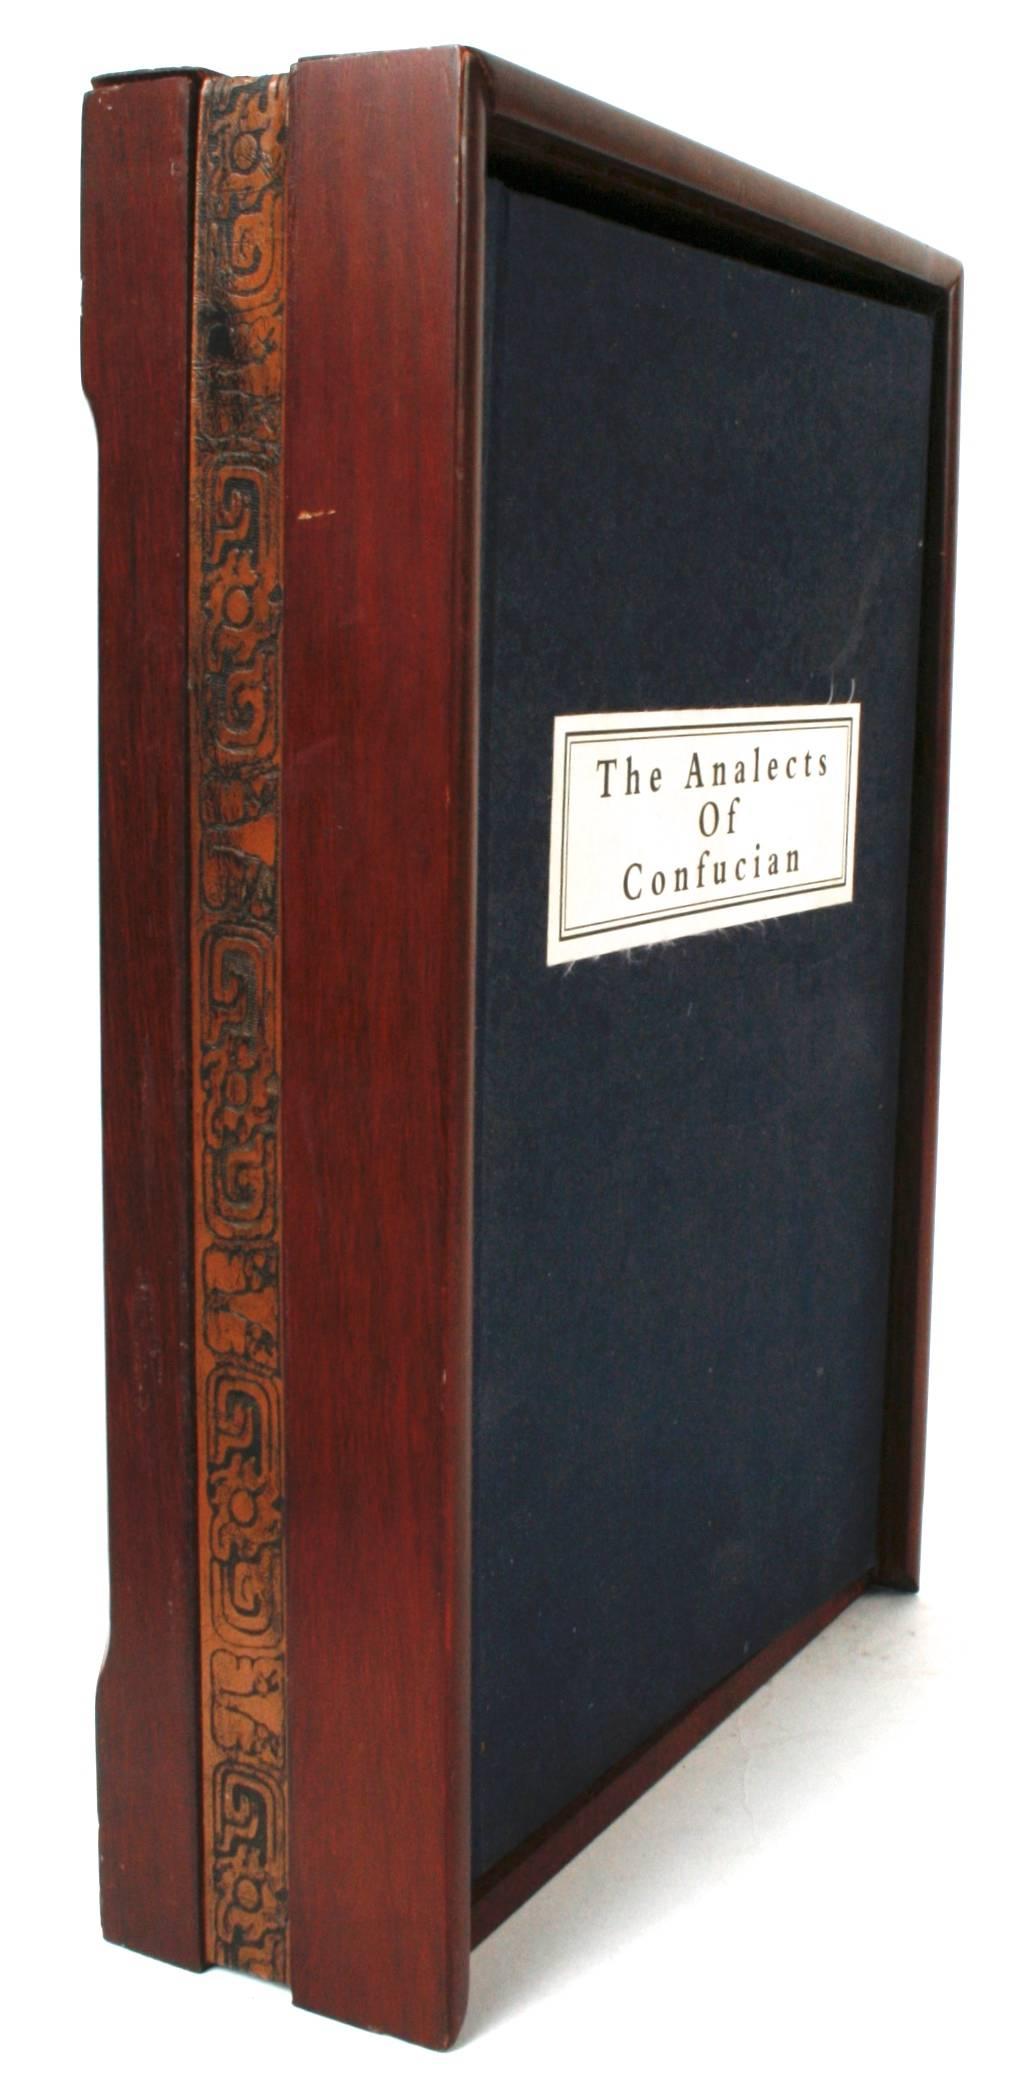 The Analects of Confucian. No publisher or date. This is a deluxe collectible silk edition of the Analects of Confucius in three volumes including an English translation. It is printed on silk sheets, lined in silk and covered in a traditional lotus